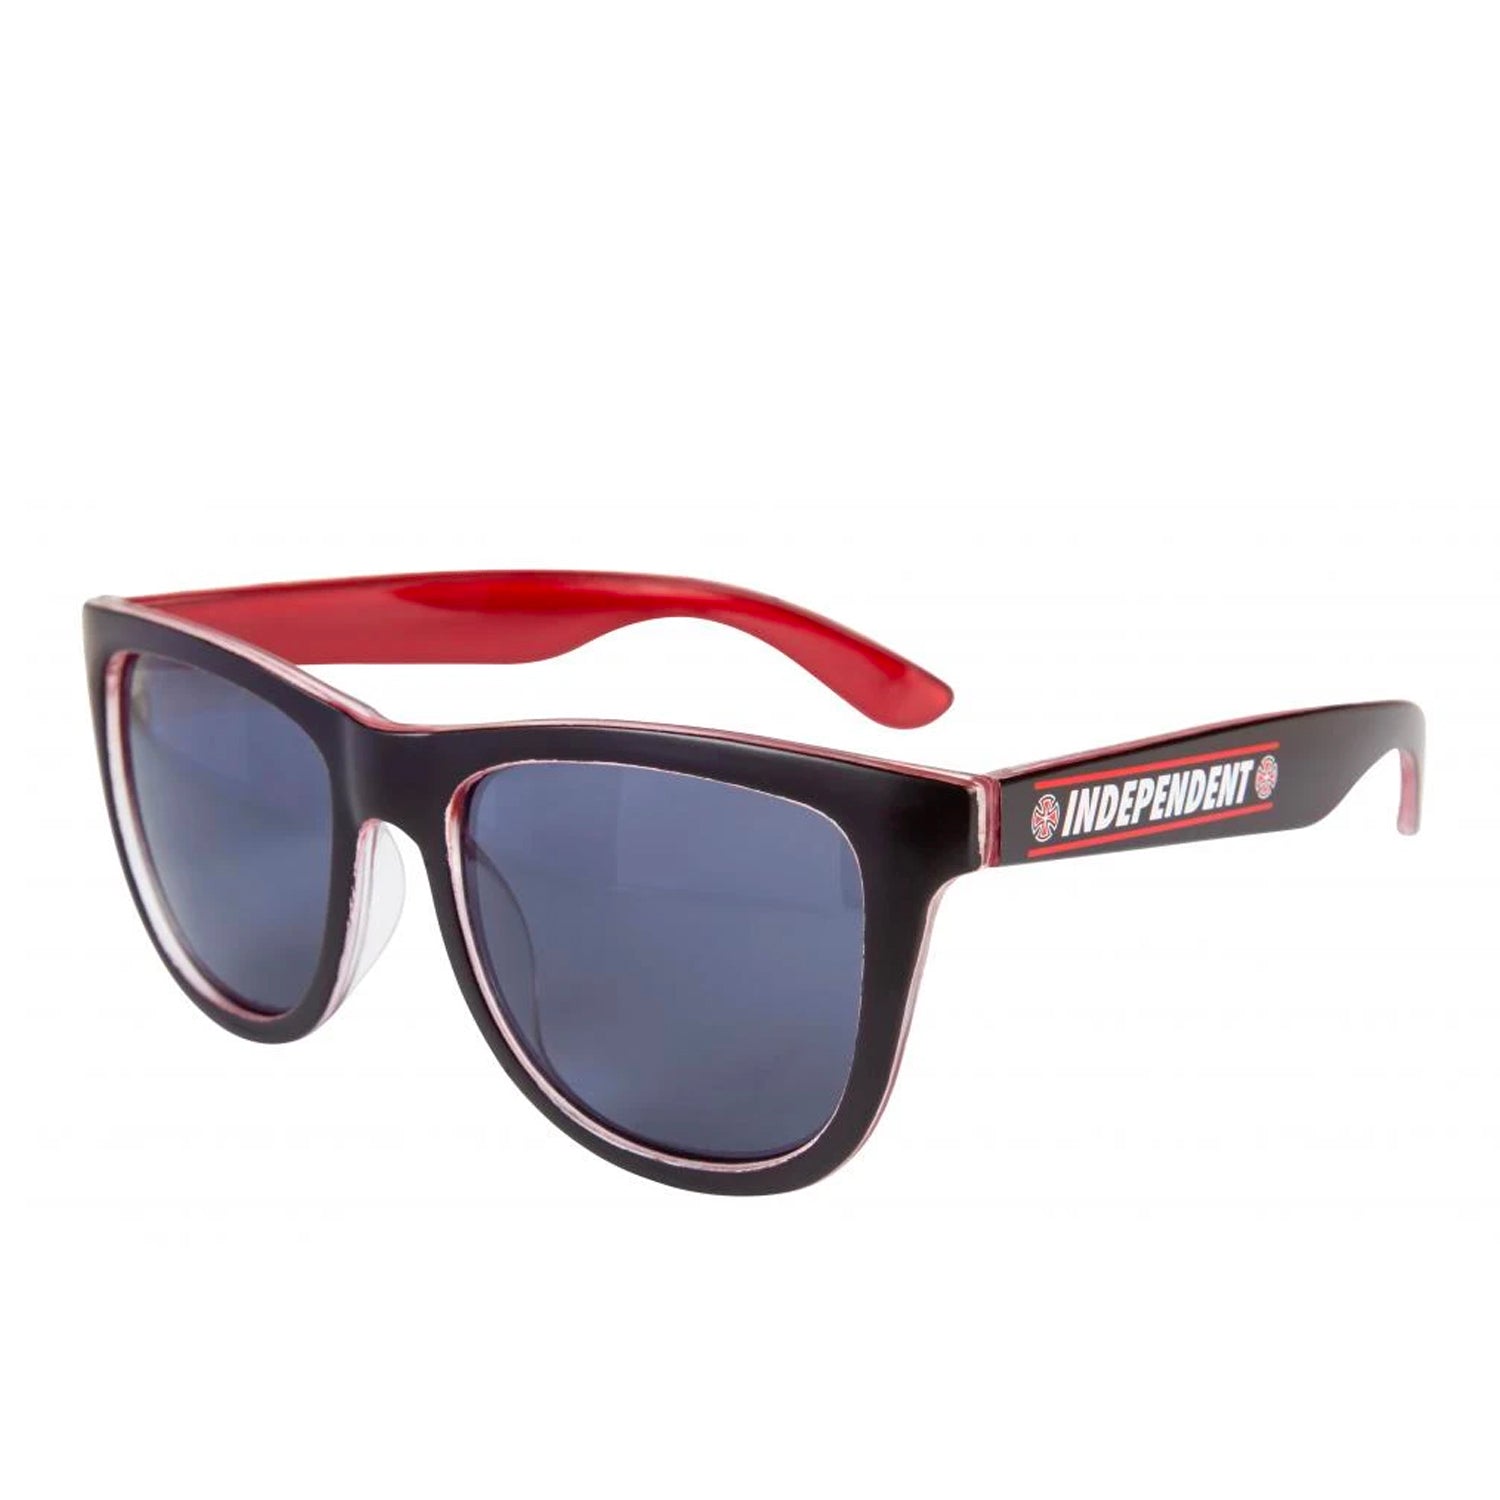 Independent Shear Sunglasses - Black / Red - Prime Delux Store